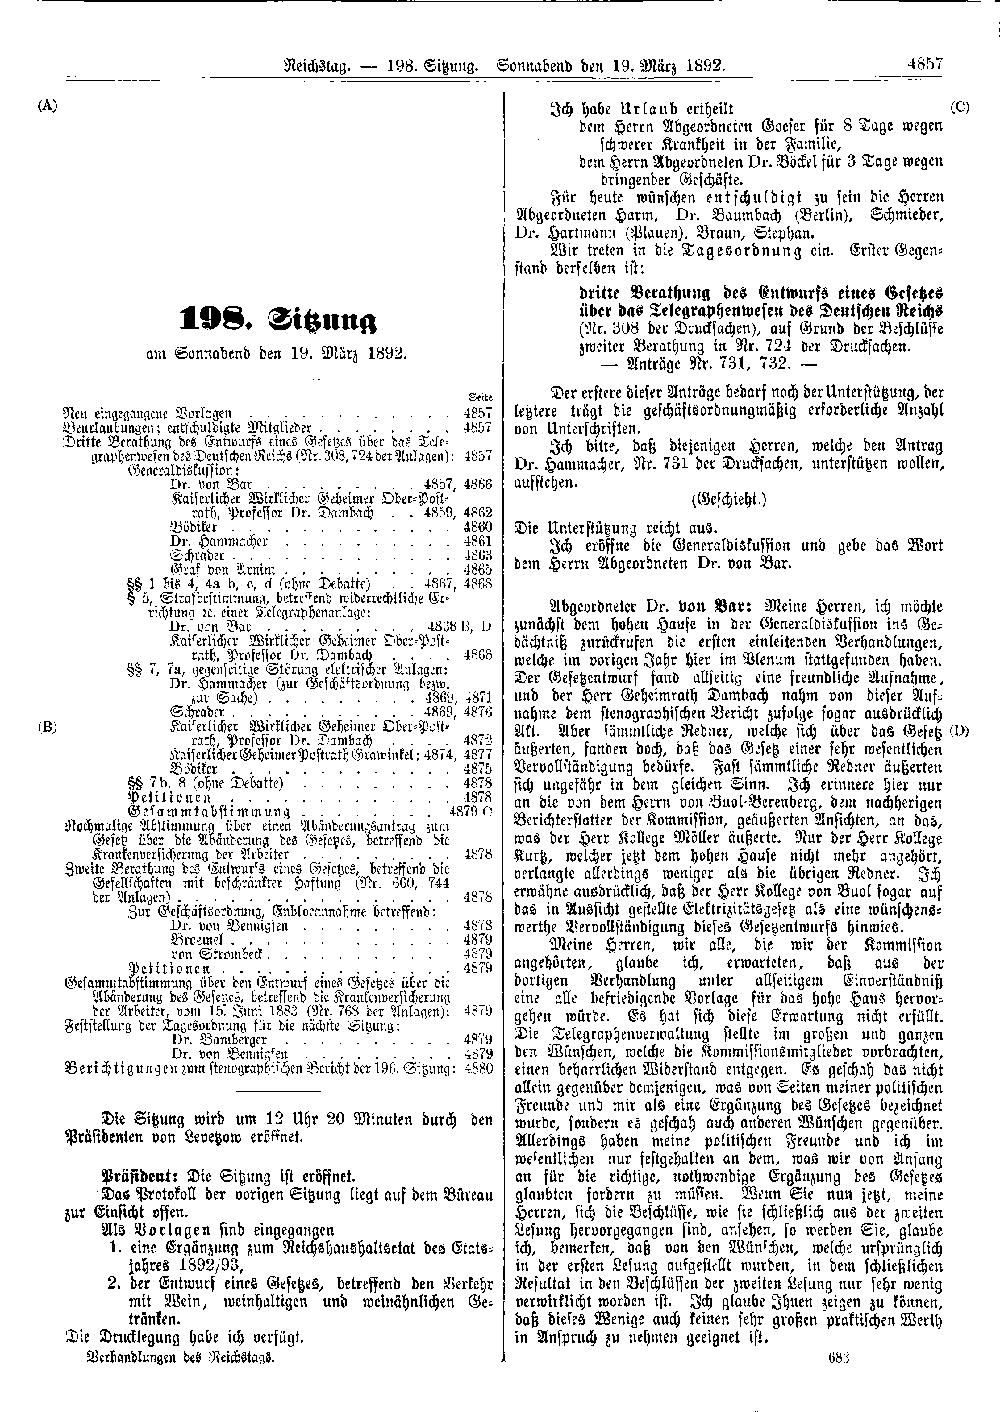 Scan of page 4857